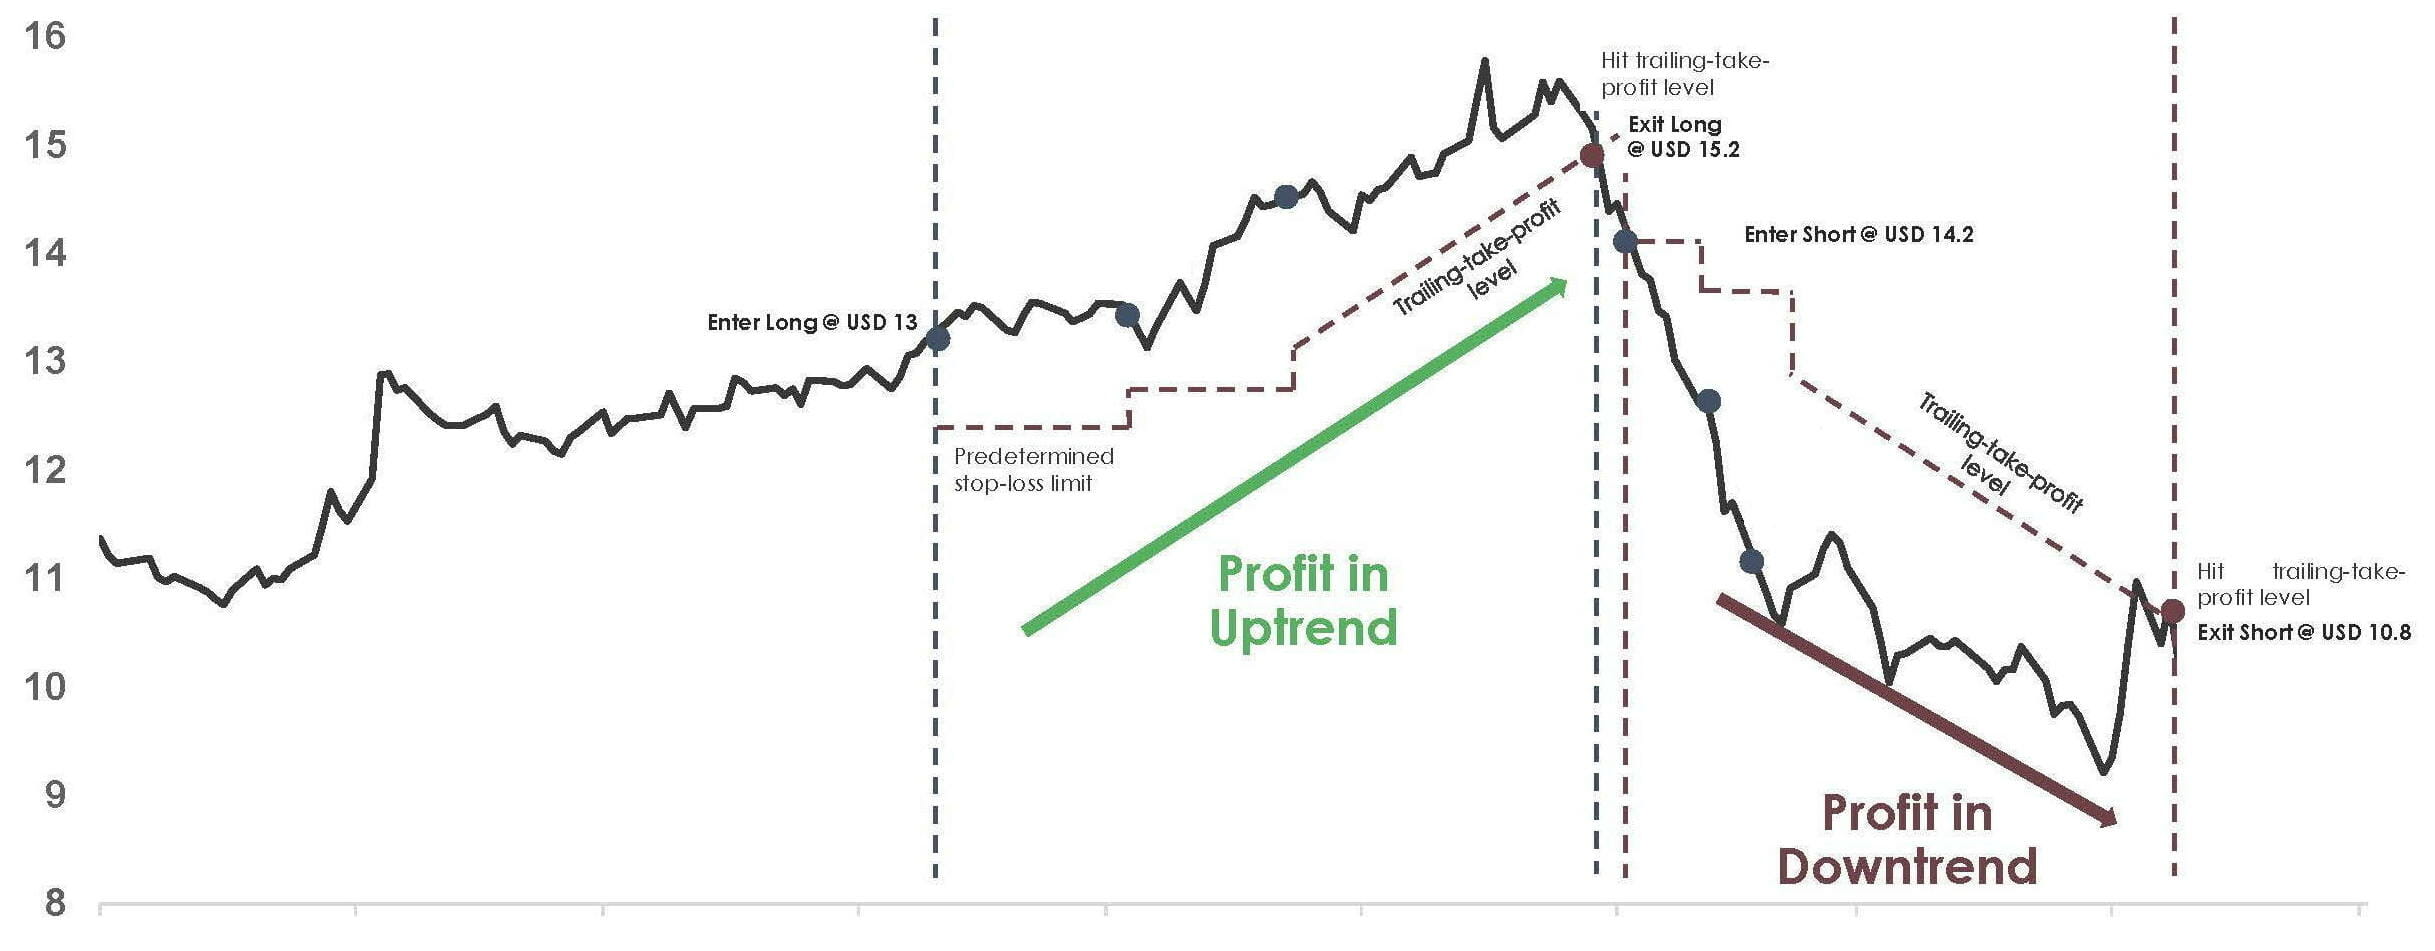 Trend Following Trade Example